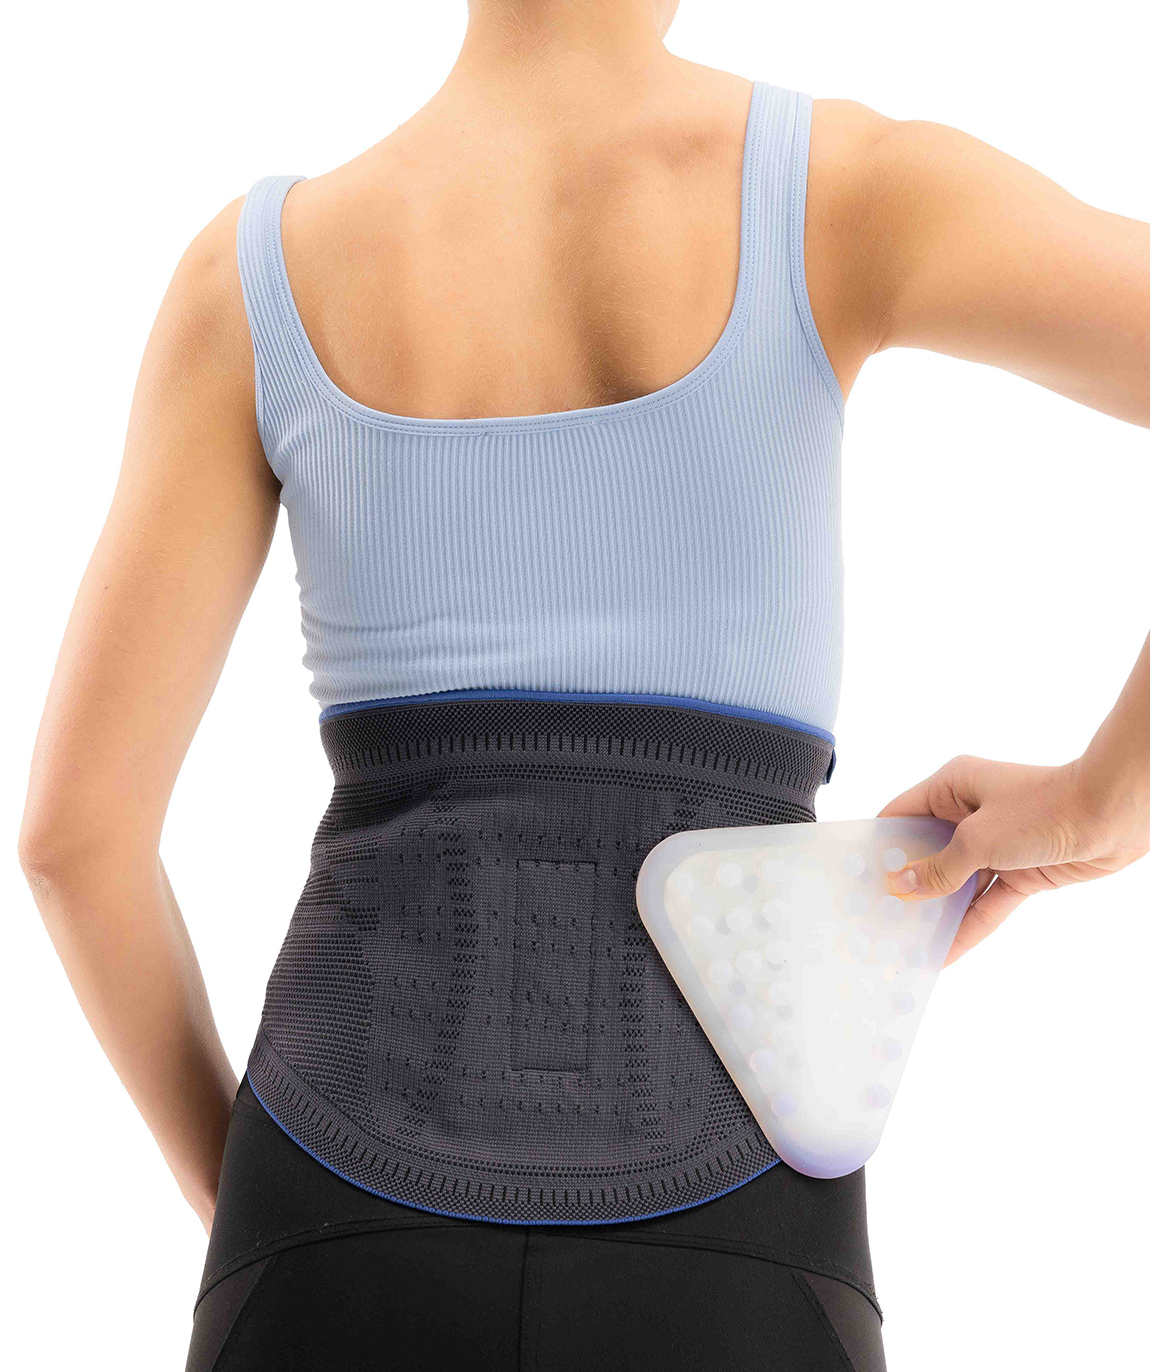 Ducomi® Miracle Belt - Slimming and Shaping Lumbar Support Corset